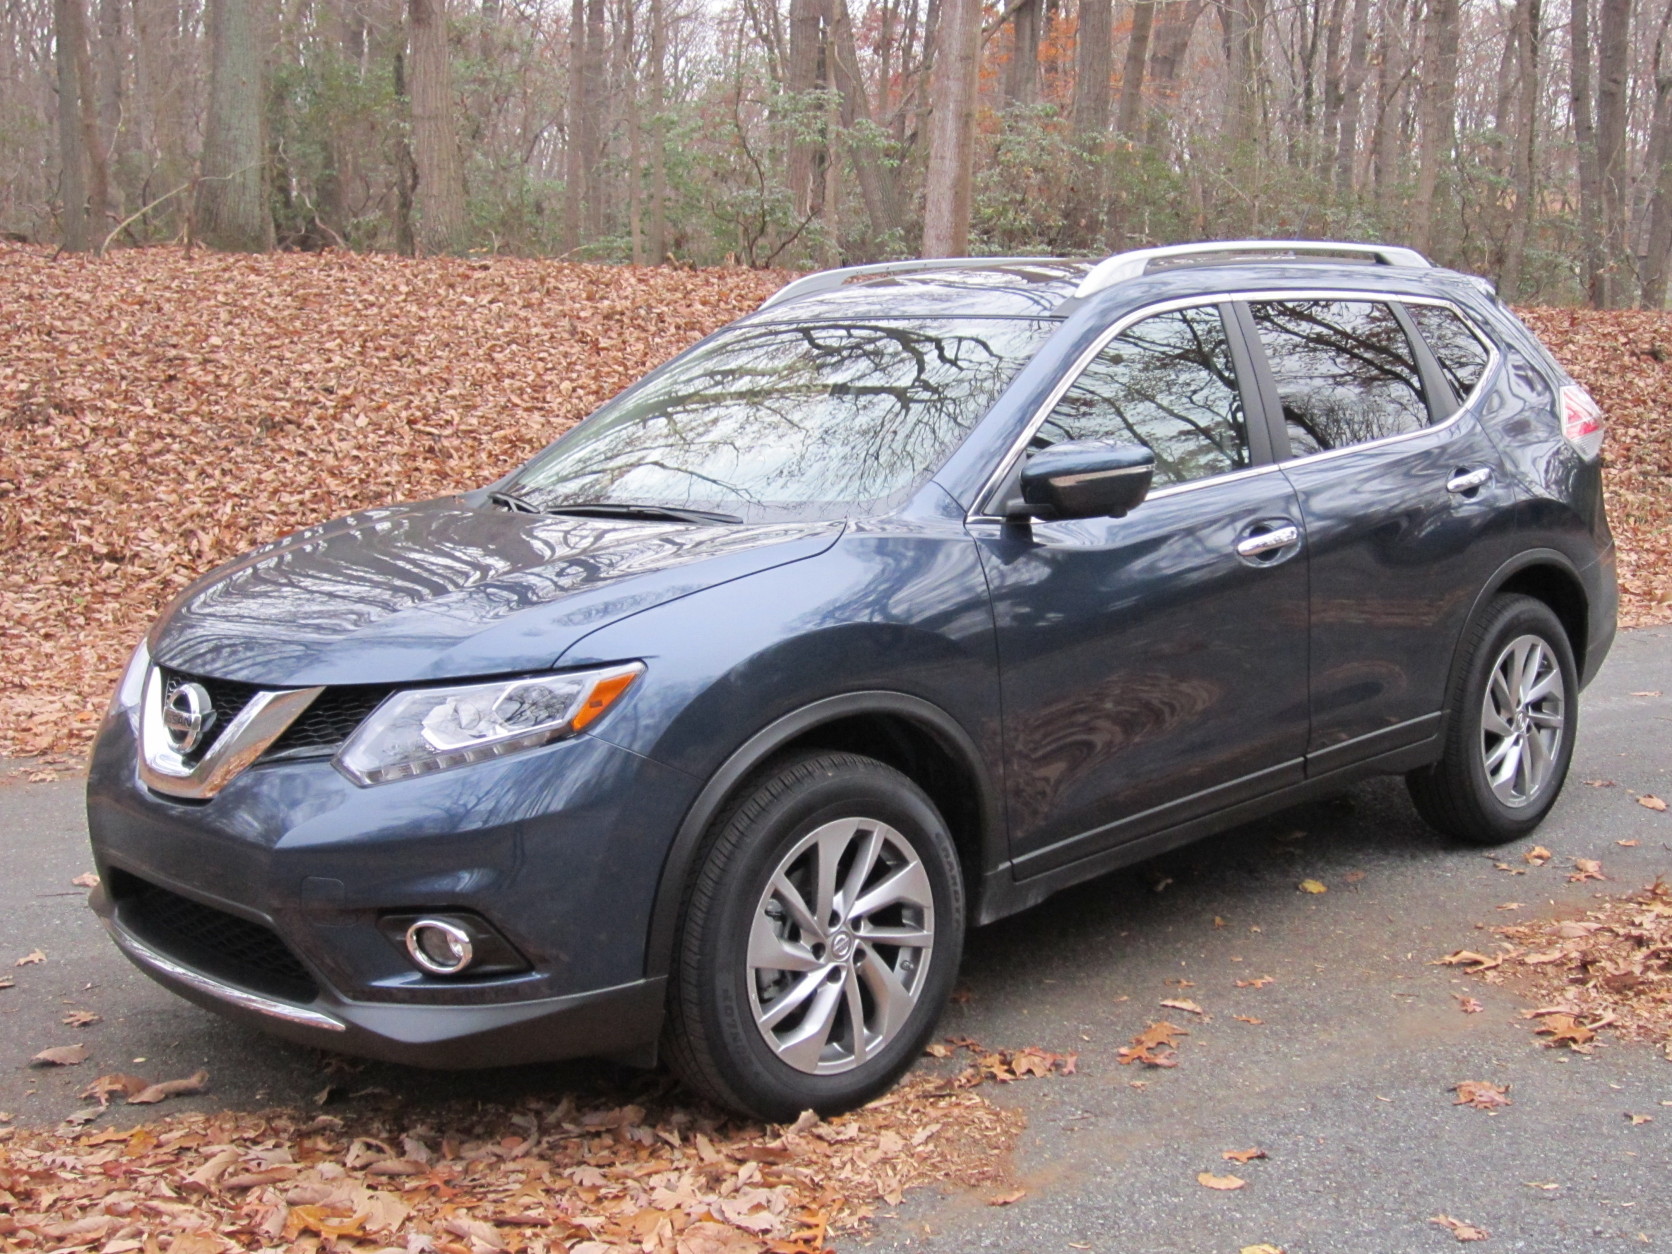 Driving the Rogue is a pleasant experience as long as you’re not in a huge hurry.(WTOP/Mike Parris)